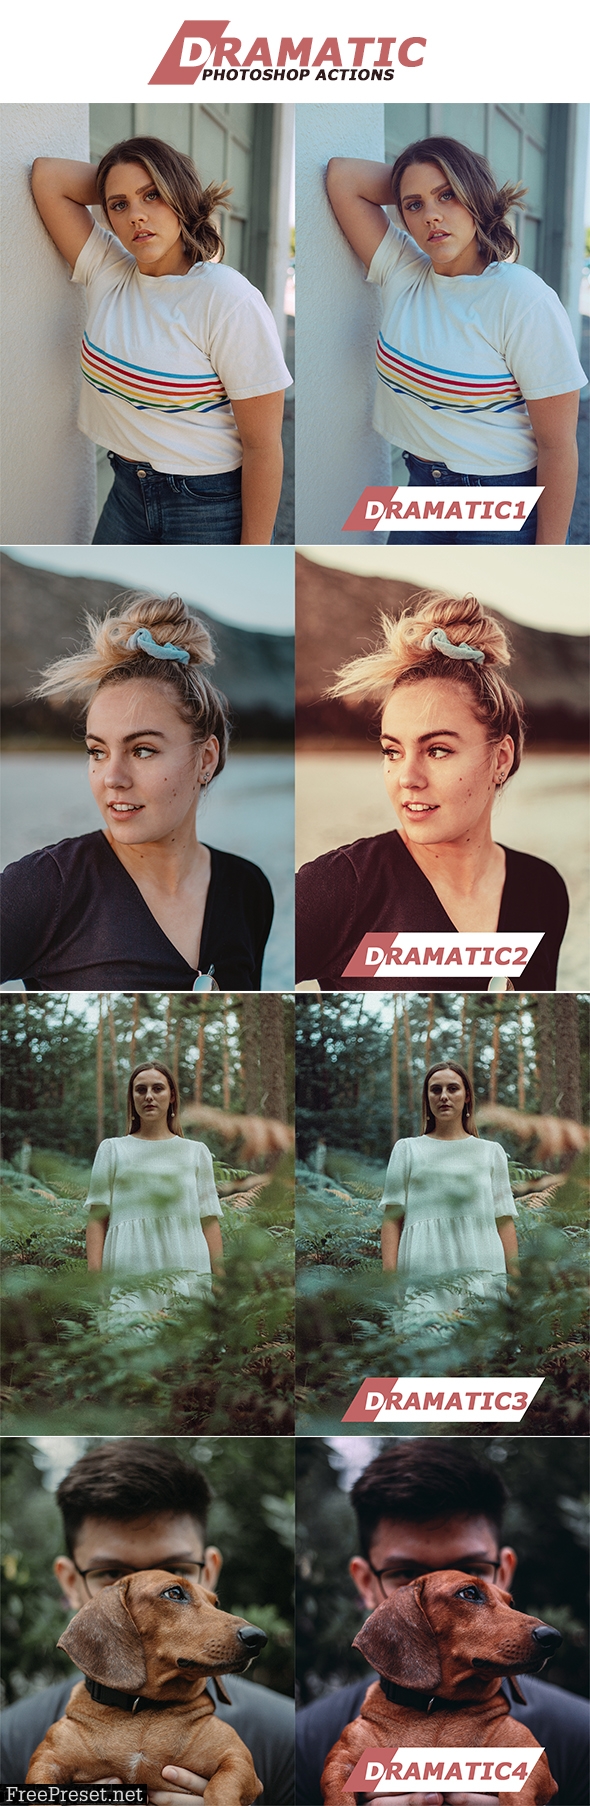 4 IN 1 Photoshop Actions September Bundle 28620663